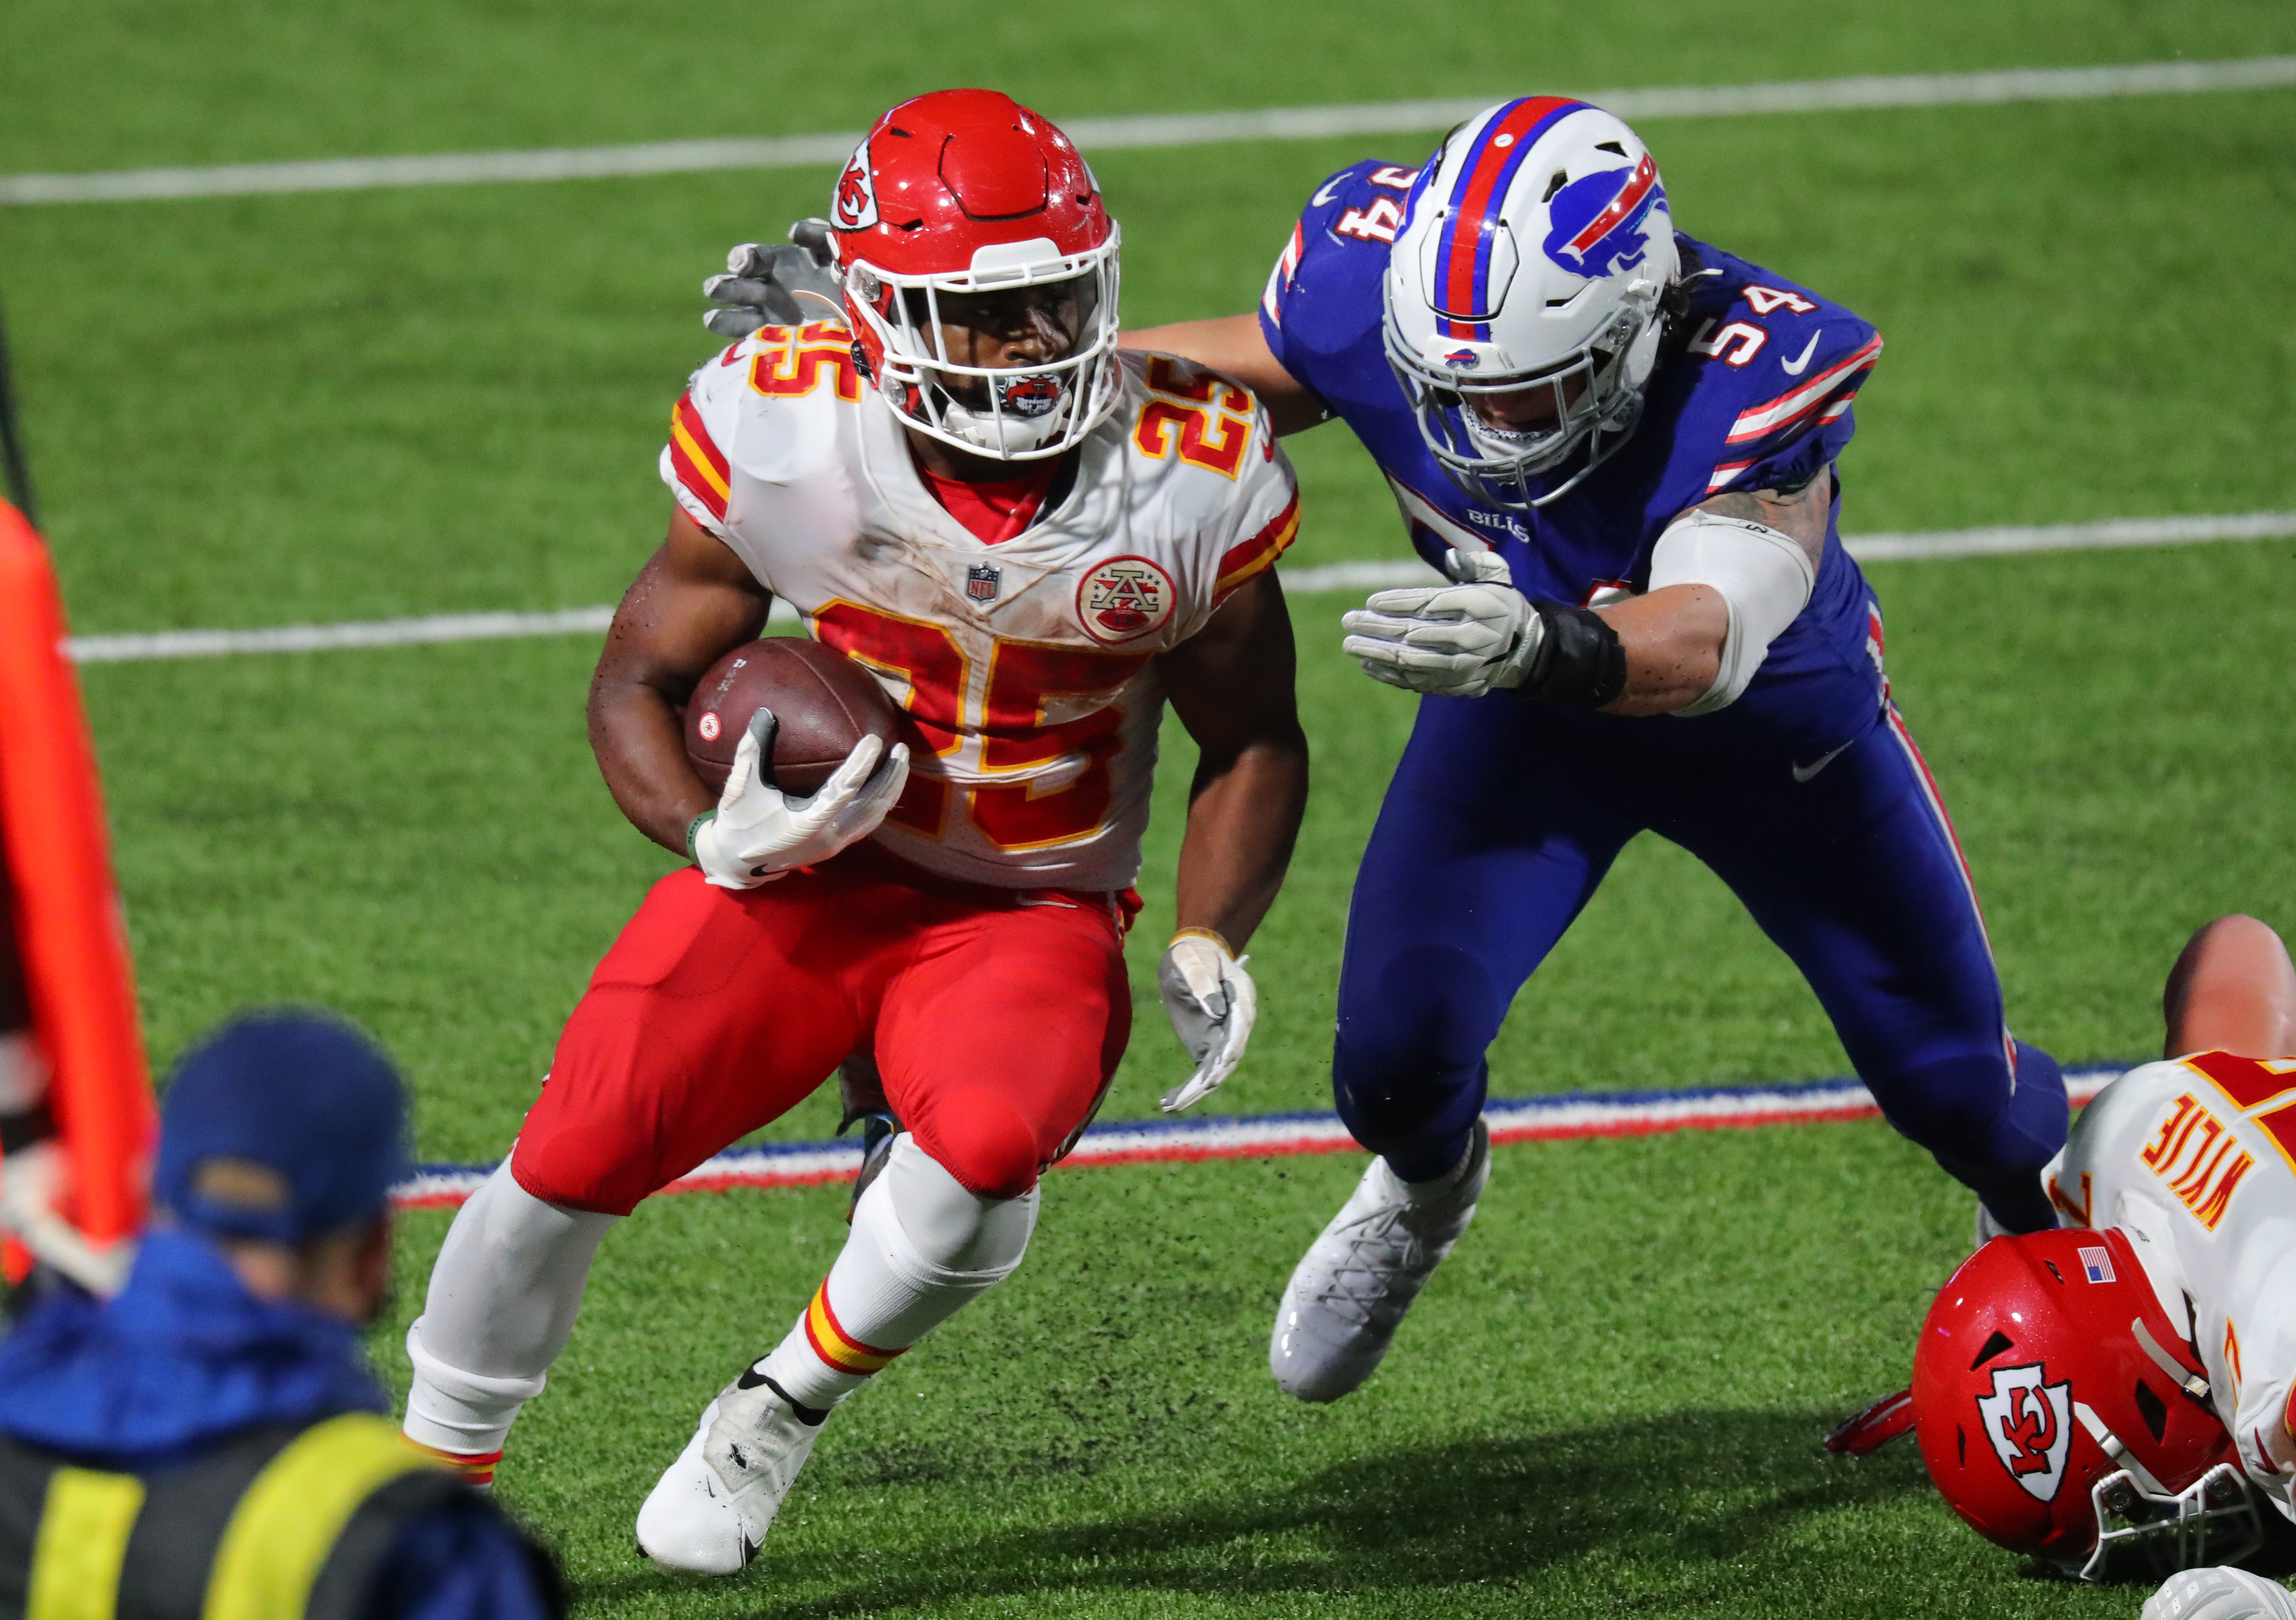 Chiefs, Edwards-Helaire run away with 26-17 win over Bills